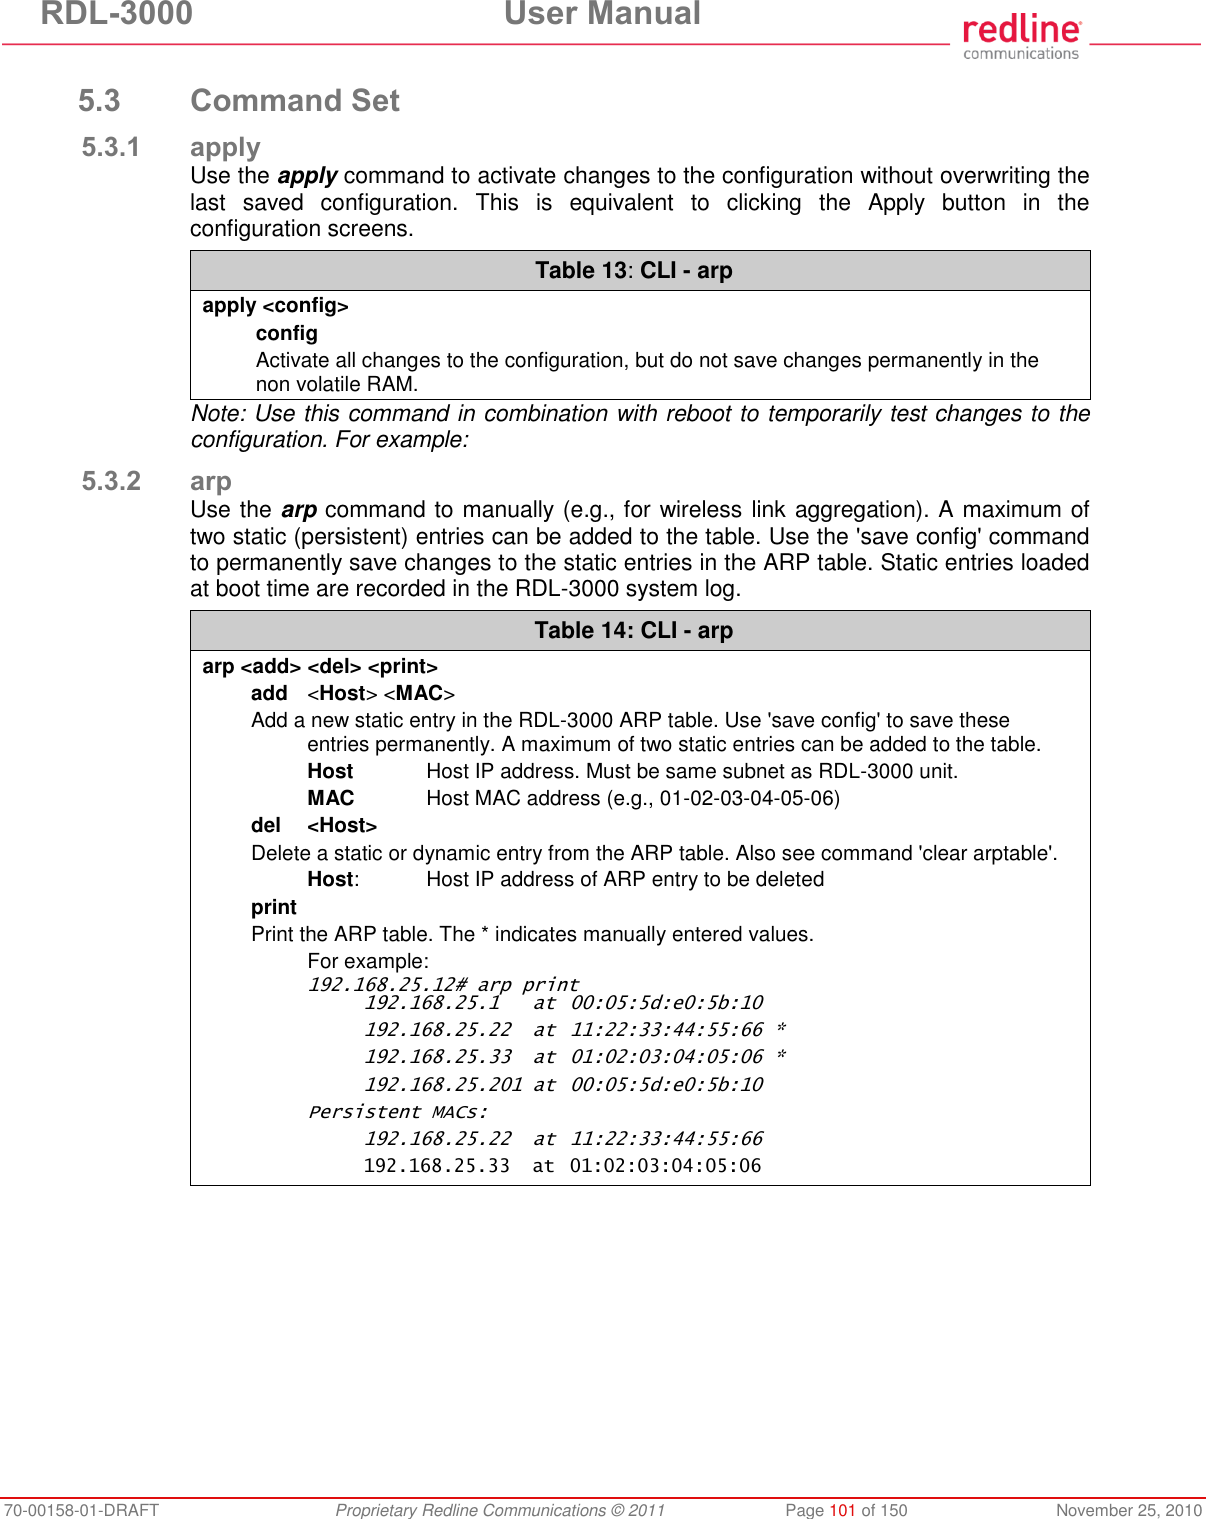 RDL-3000  User Manual 70-00158-01-DRAFT  Proprietary Redline Communications © 2011  Page 101 of 150  November 25, 2010  5.3 Command Set 5.3.1 apply Use the apply command to activate changes to the configuration without overwriting the last  saved  configuration.  This  is  equivalent  to  clicking  the  Apply  button  in  the configuration screens.  Table 13: CLI - arp apply &lt;config&gt; config Activate all changes to the configuration, but do not save changes permanently in the non volatile RAM. Note: Use this command in combination with reboot to temporarily test changes to the configuration. For example: 5.3.2 arp Use the arp command to manually (e.g., for wireless link aggregation). A maximum of two static (persistent) entries can be added to the table. Use the &apos;save config&apos; command to permanently save changes to the static entries in the ARP table. Static entries loaded at boot time are recorded in the RDL-3000 system log. Table 14: CLI - arp arp &lt;add&gt; &lt;del&gt; &lt;print&gt; add  &lt;Host&gt; &lt;MAC&gt; Add a new static entry in the RDL-3000 ARP table. Use &apos;save config&apos; to save these entries permanently. A maximum of two static entries can be added to the table.  Host  Host IP address. Must be same subnet as RDL-3000 unit.  MAC  Host MAC address (e.g., 01-02-03-04-05-06) del  &lt;Host&gt; Delete a static or dynamic entry from the ARP table. Also see command &apos;clear arptable&apos;.  Host:  Host IP address of ARP entry to be deleted print Print the ARP table. The * indicates manually entered values.   For example: 192.168.25.12# arp print   192.168.25.1  at  00:05:5d:e0:5b:10   192.168.25.22  at  11:22:33:44:55:66 *   192.168.25.33  at  01:02:03:04:05:06 *   192.168.25.201 at  00:05:5d:e0:5b:10 Persistent MACs:   192.168.25.22  at  11:22:33:44:55:66   192.168.25.33  at  01:02:03:04:05:06  